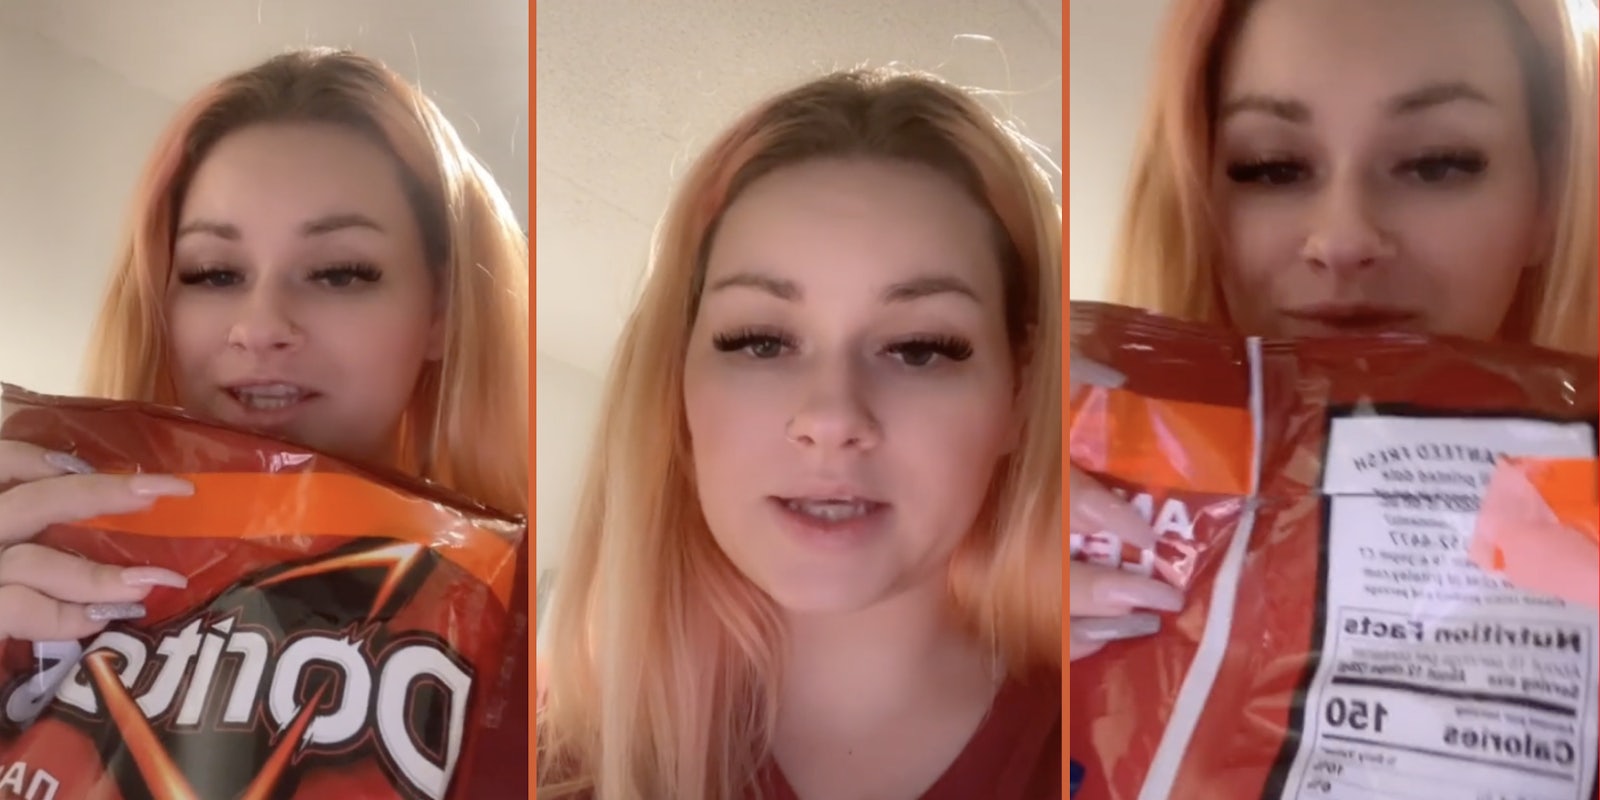 instacart customer holds up bag of Doritos, which appears to have been opened and taped shut with bright orange tape at the top of the bag